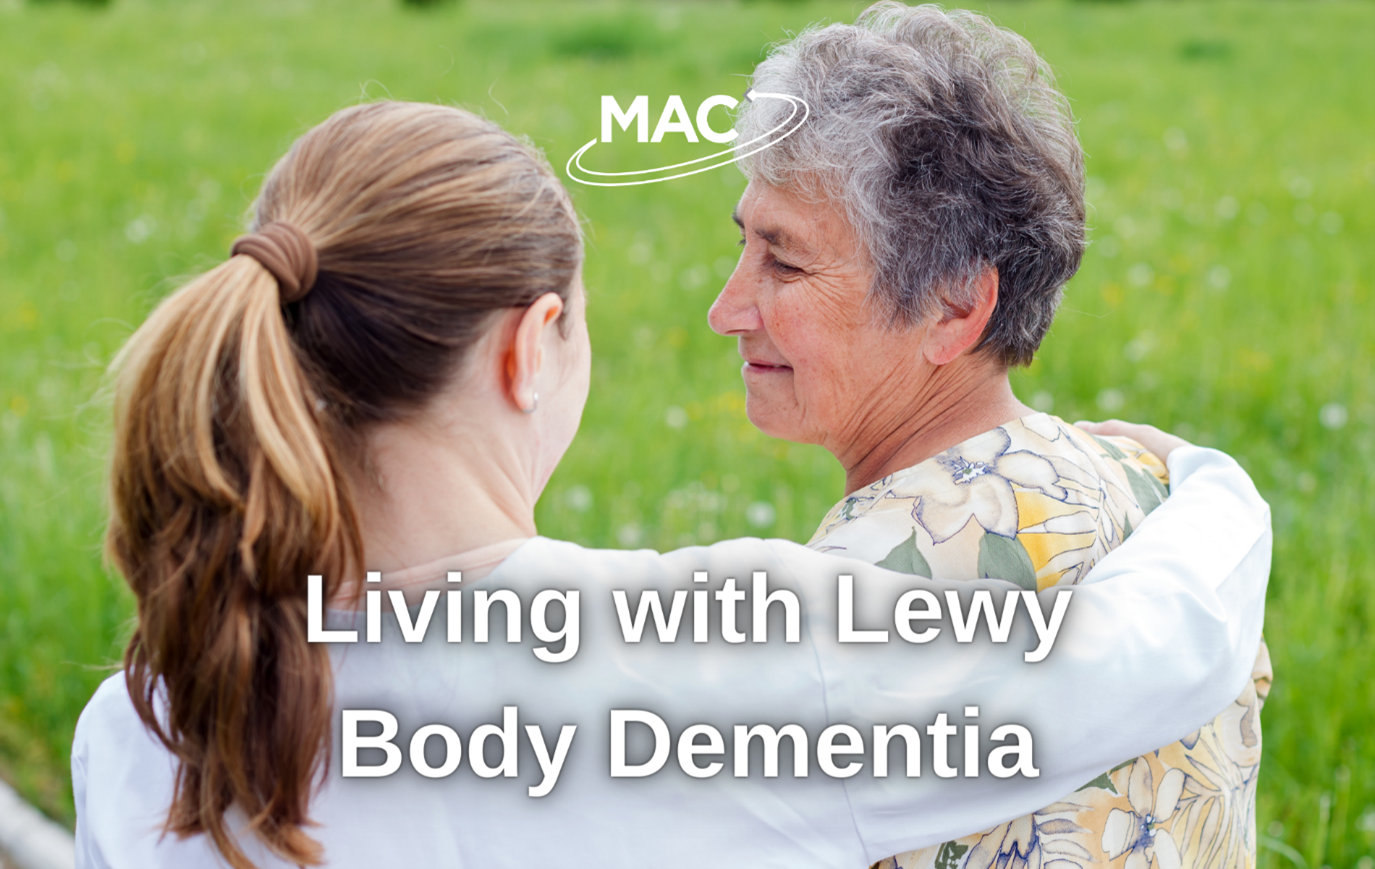 Living with lewy body dementia